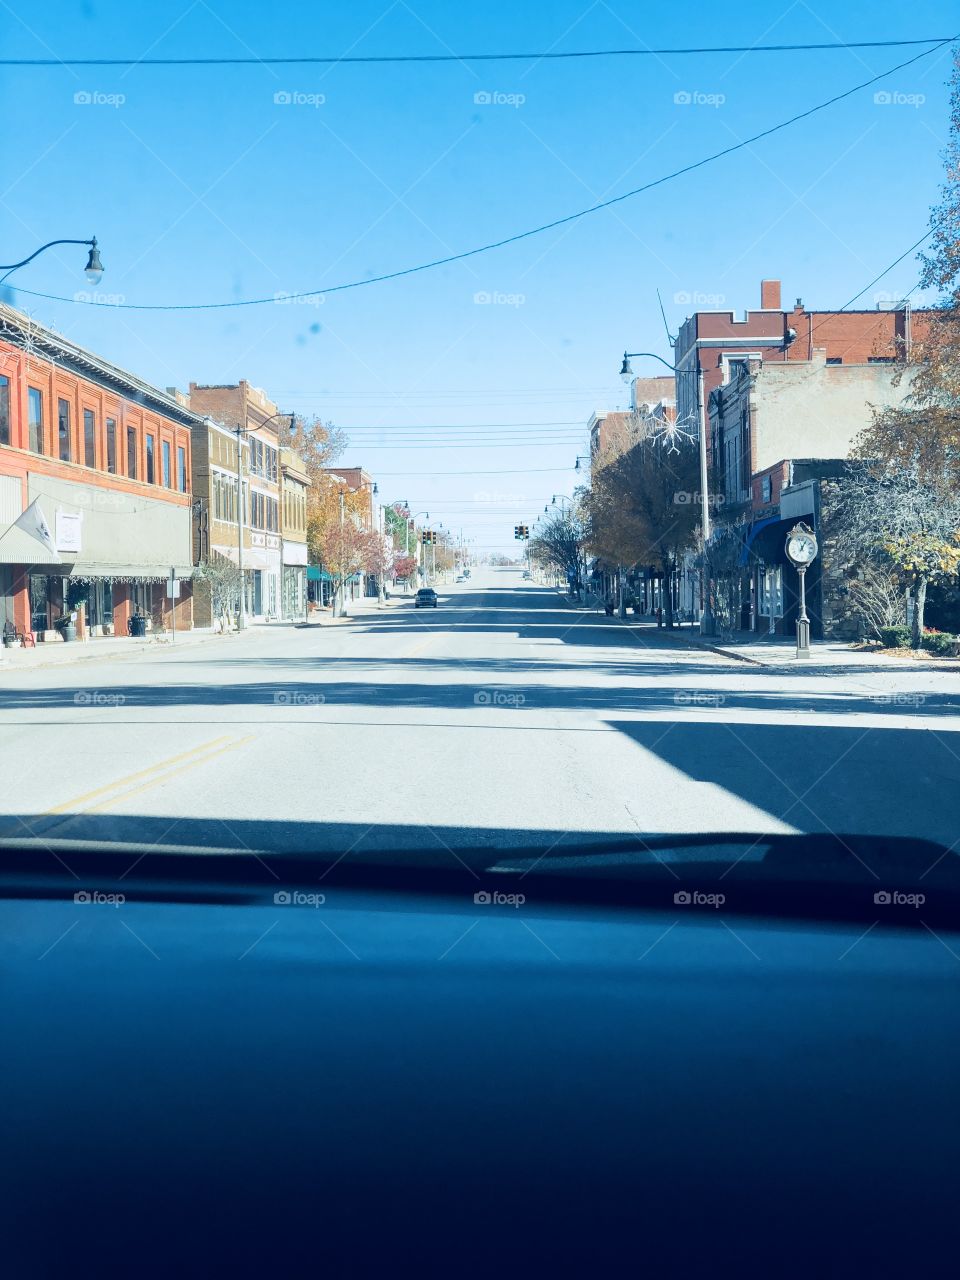 Relaxing drive small town mid America